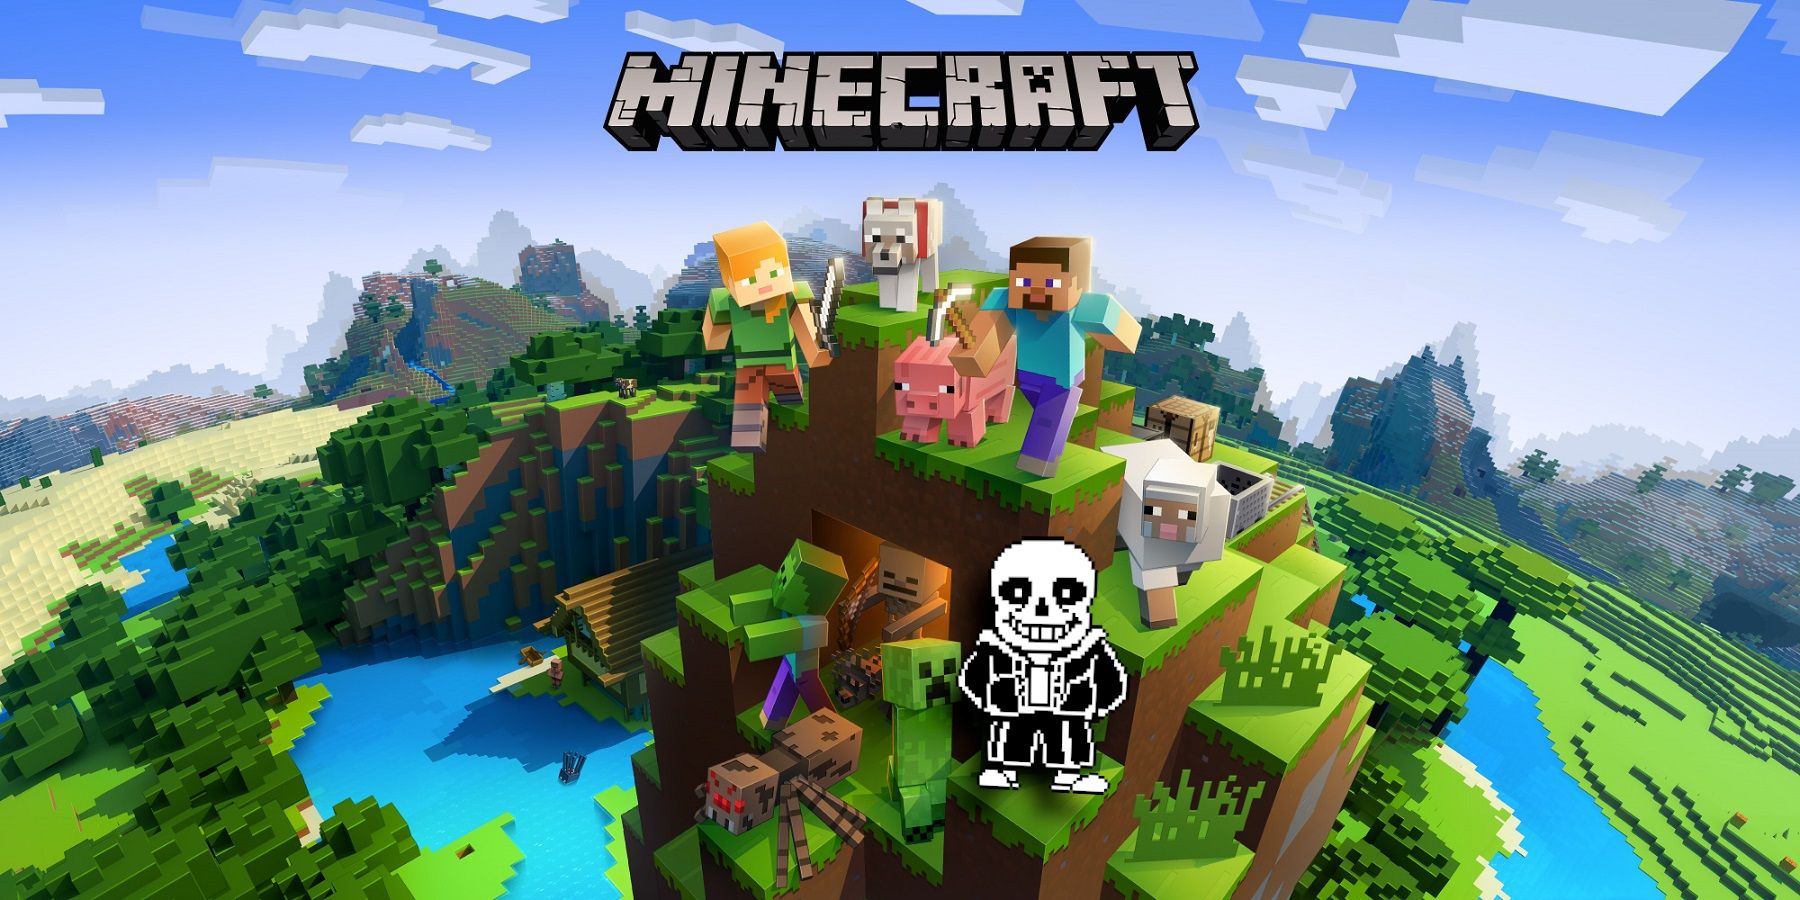 Image from Minecraft showing all the main characters at the top of the hill, with Undertale's Sans just beneath them.